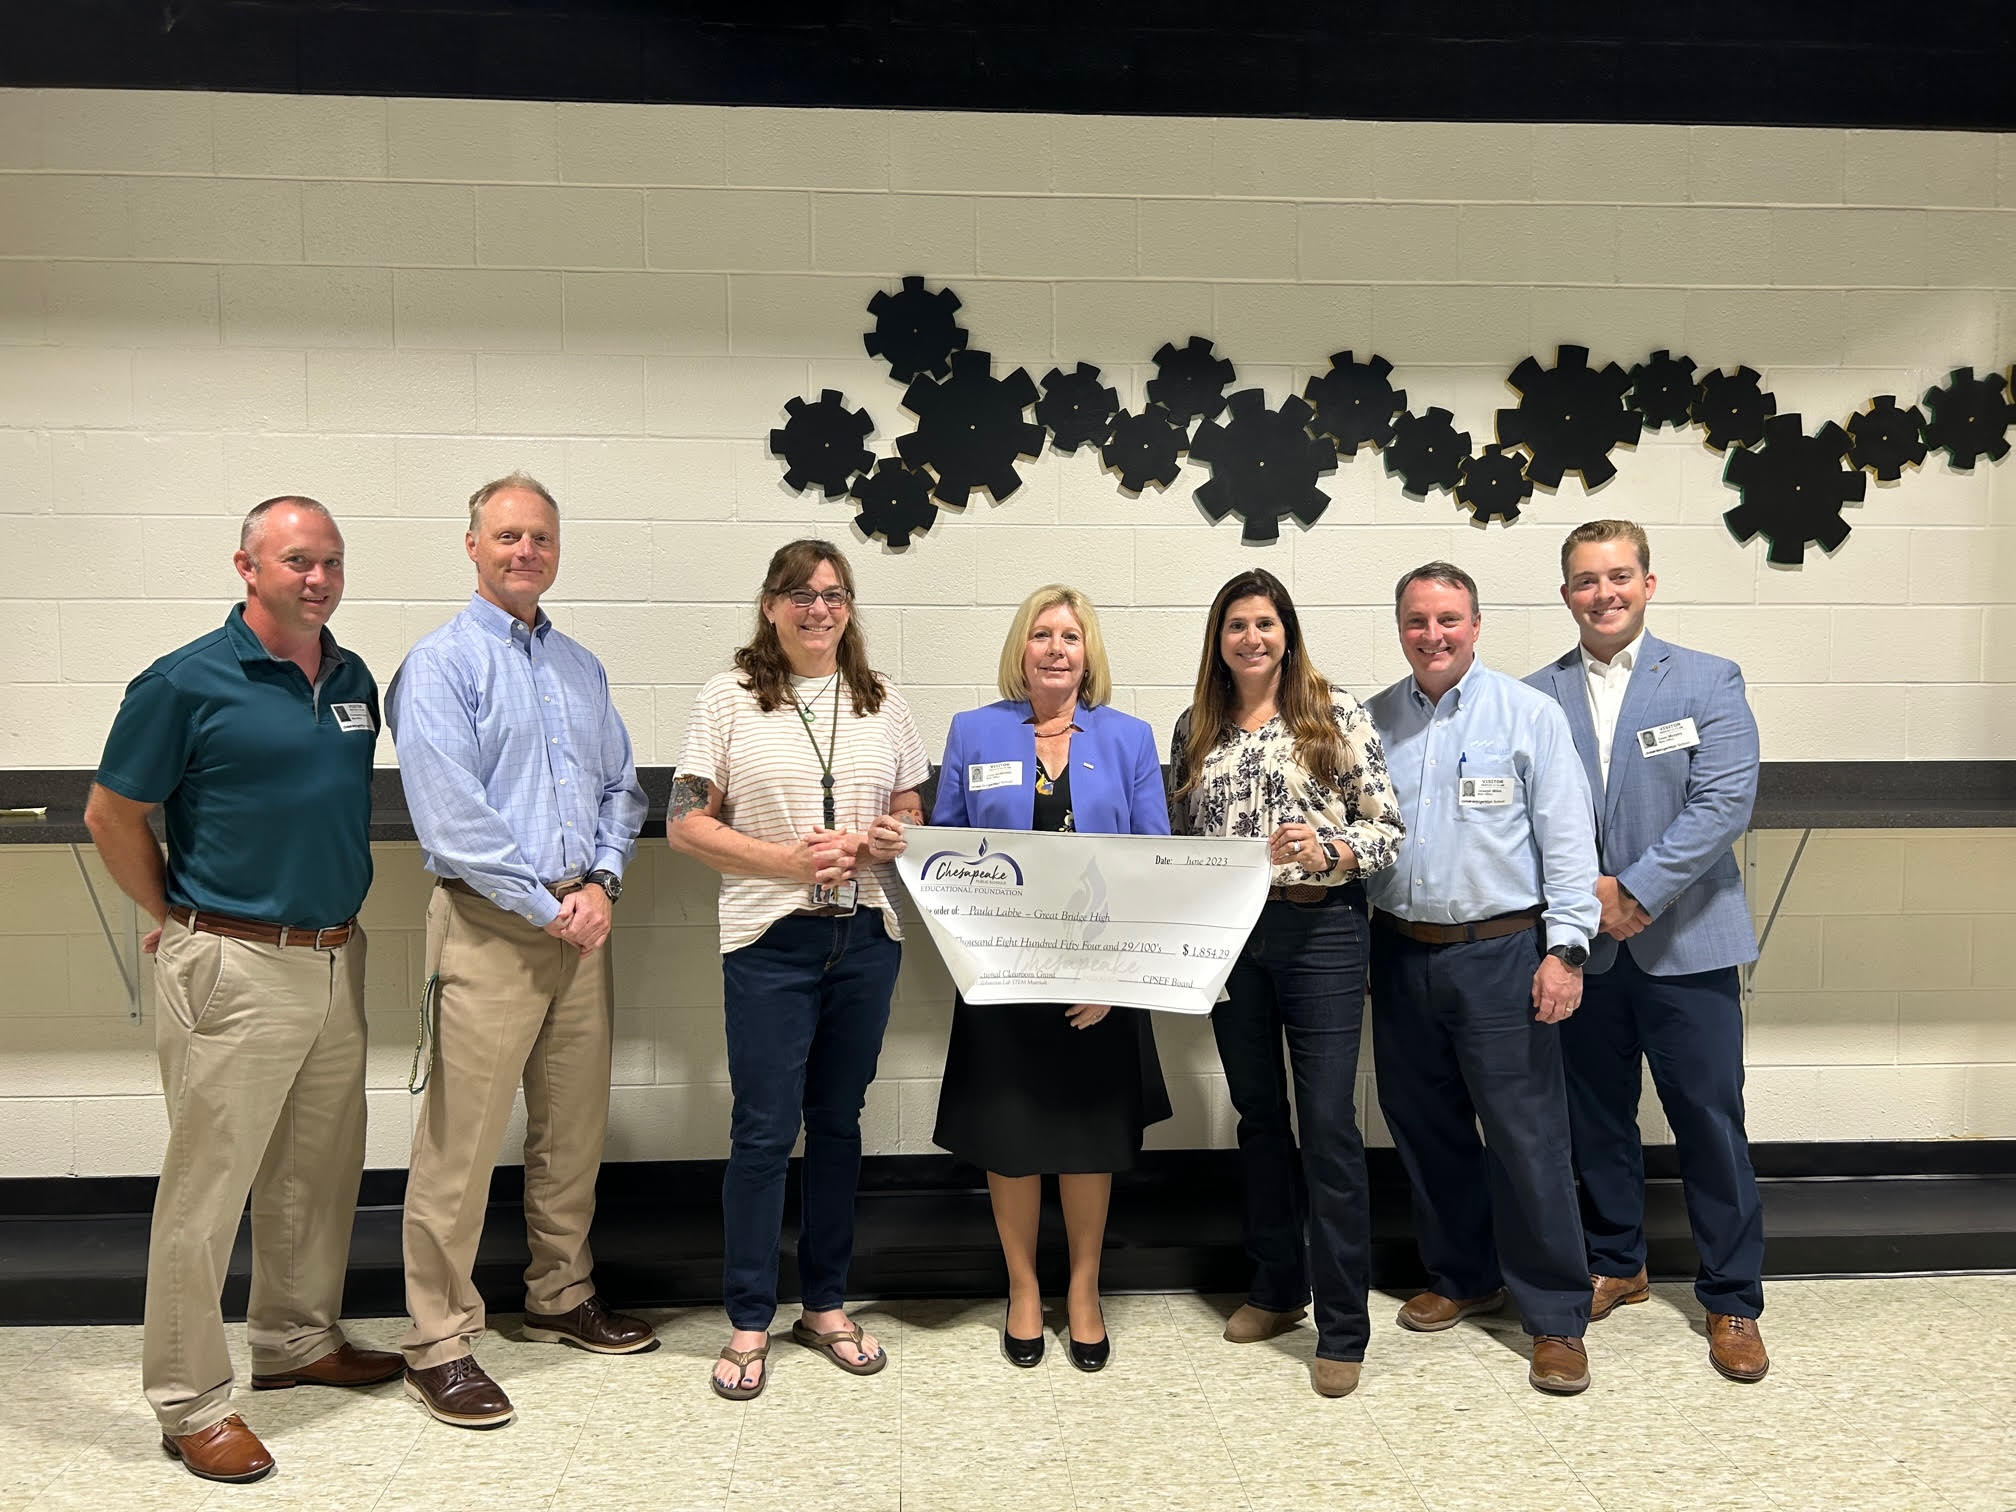 Congratulations to Paula Labbe from Great Bridge High School for being awarded a $1,854.29 grant to support the Collaboration Lab. Thank you to TowneBank for your support!